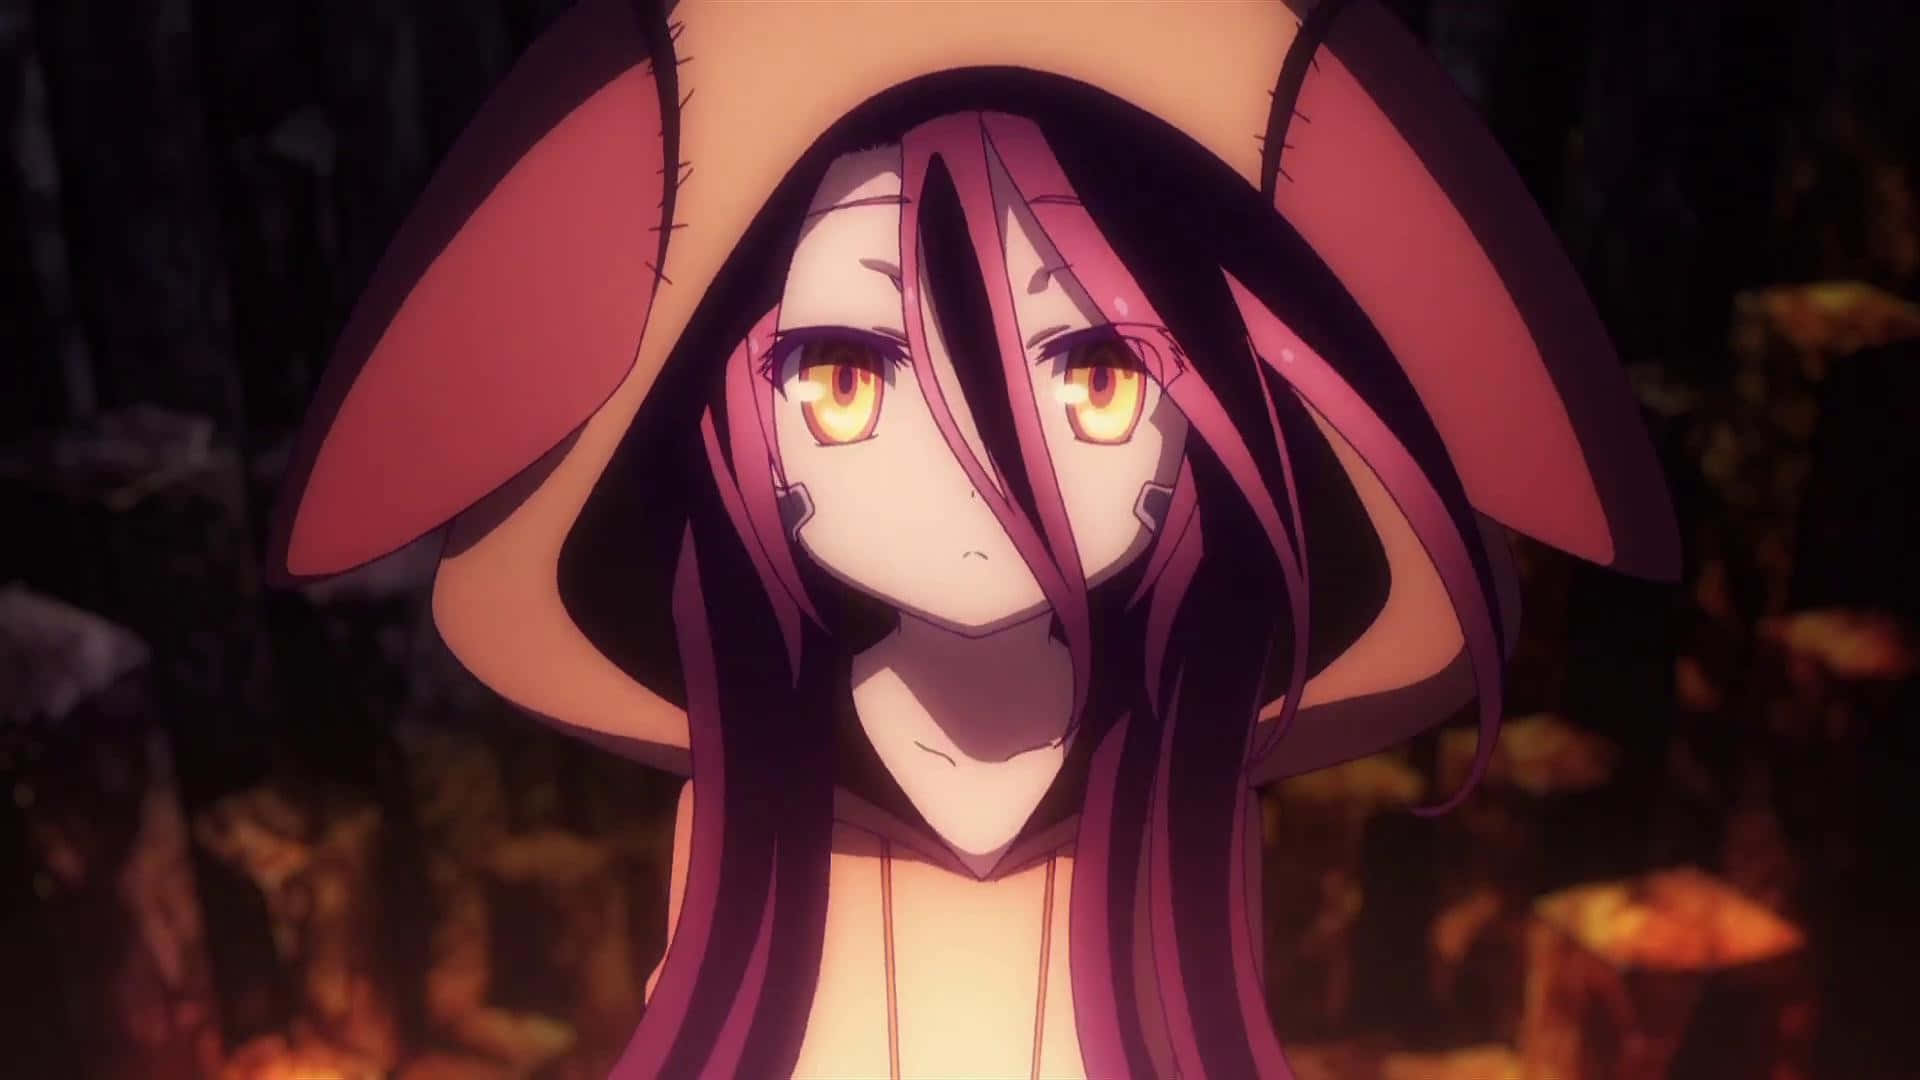 Step into a world of limitless possibilities with No Game No Life.